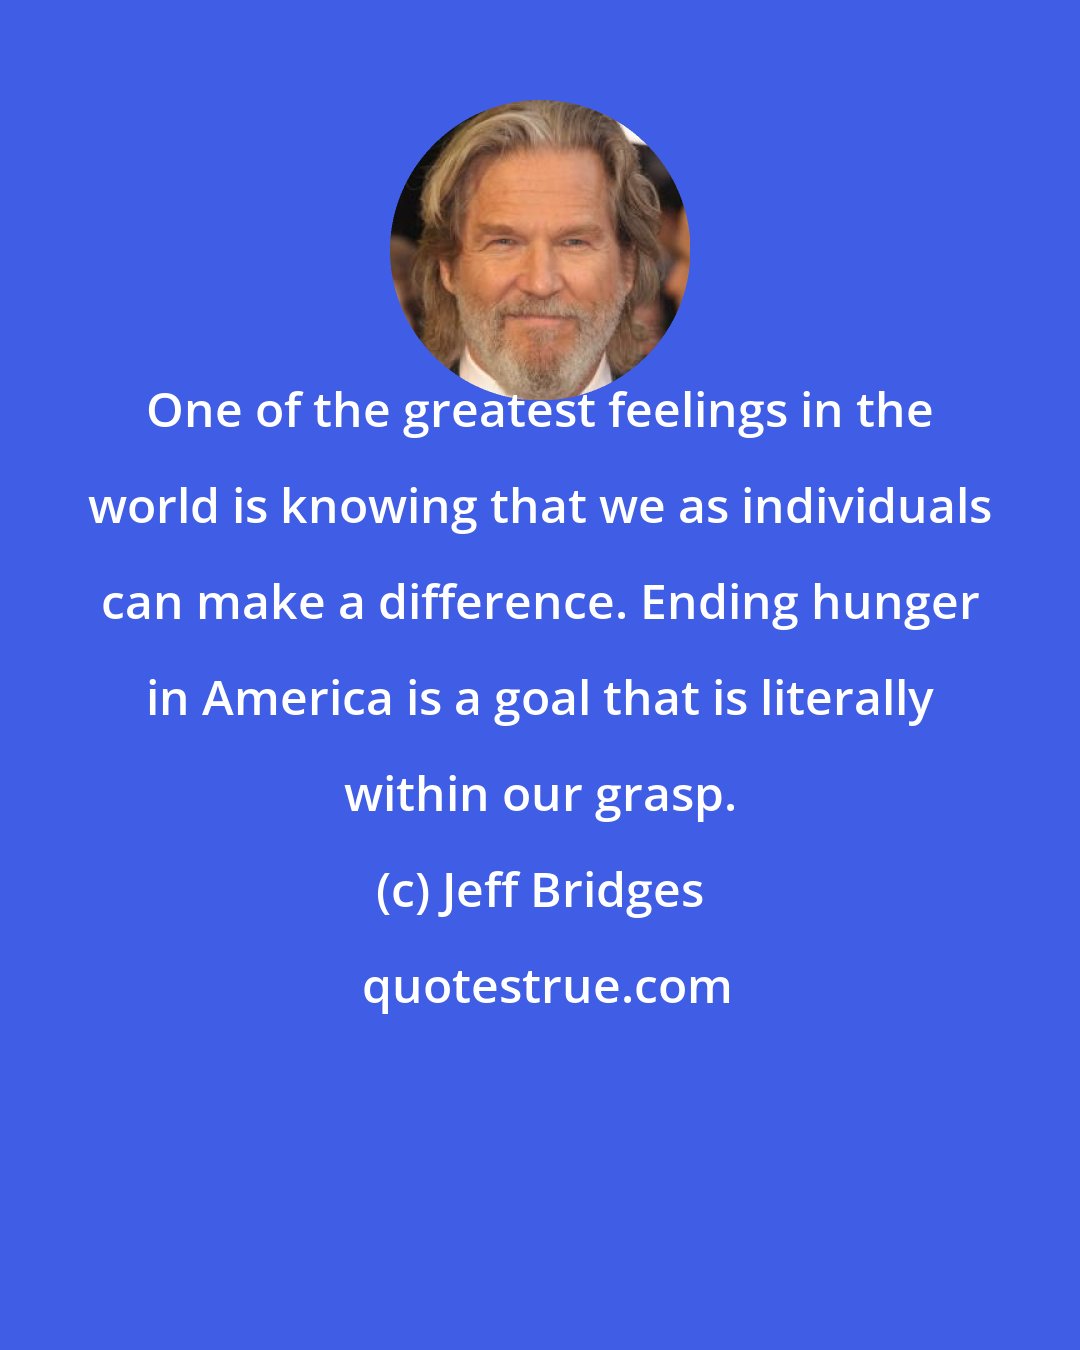 Jeff Bridges: One of the greatest feelings in the world is knowing that we as individuals can make a difference. Ending hunger in America is a goal that is literally within our grasp.